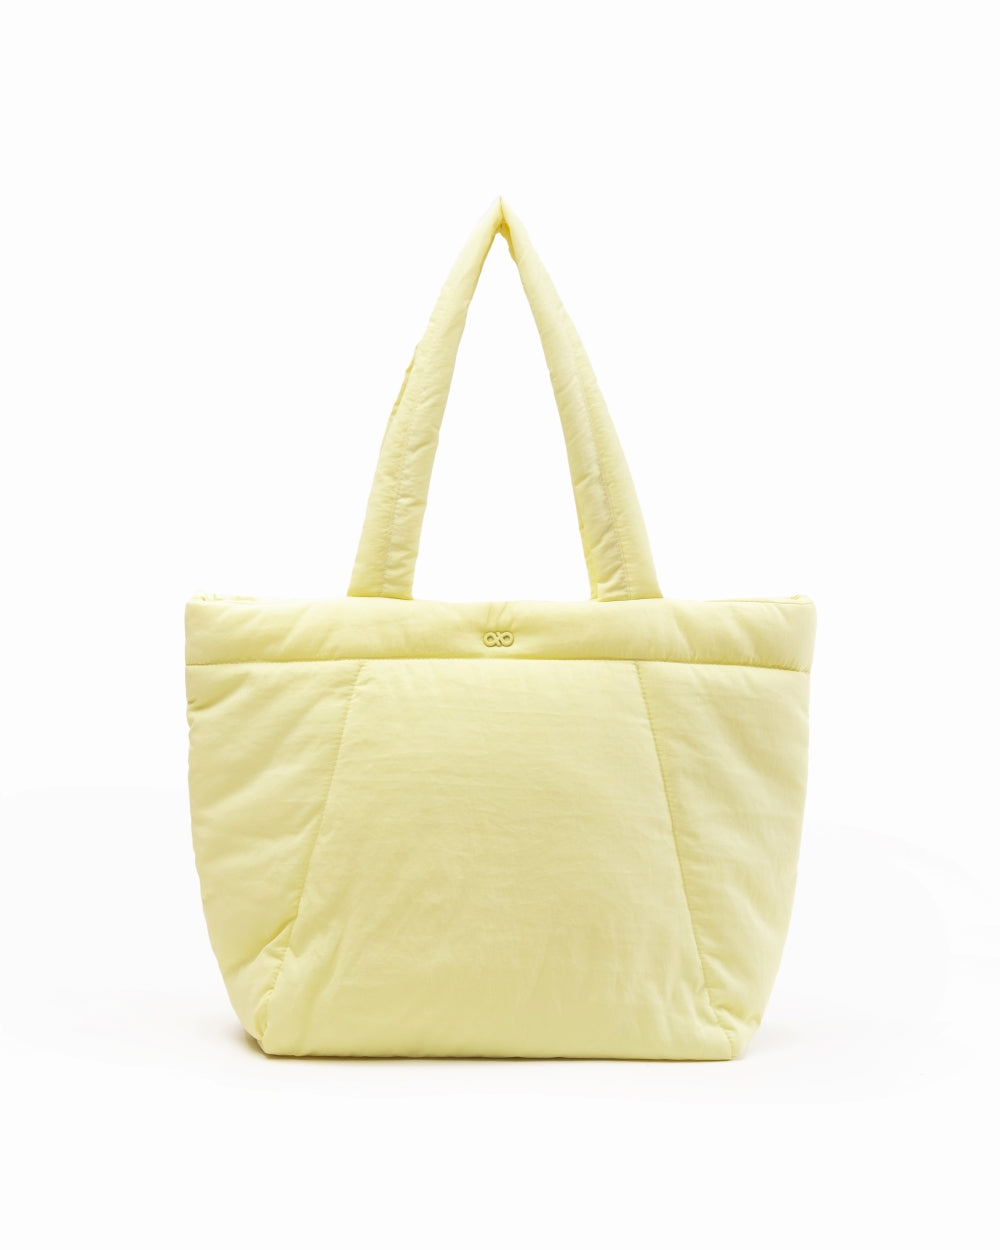 We are giving away our Cosy Puffy Tote Bag in Daffodil to one